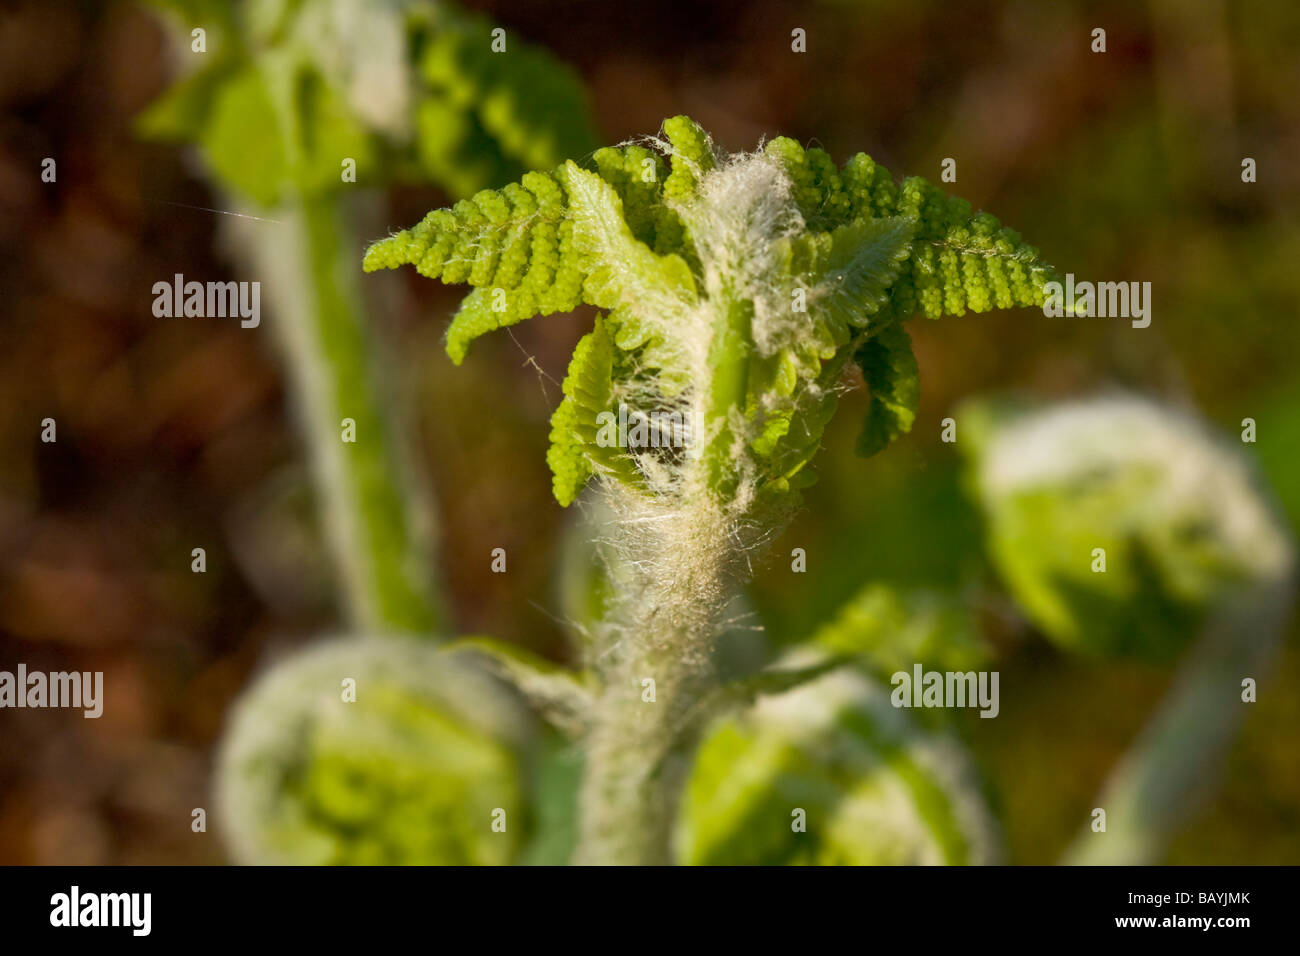 Close-up image of interrupted fern's opening fronds Stock Photo